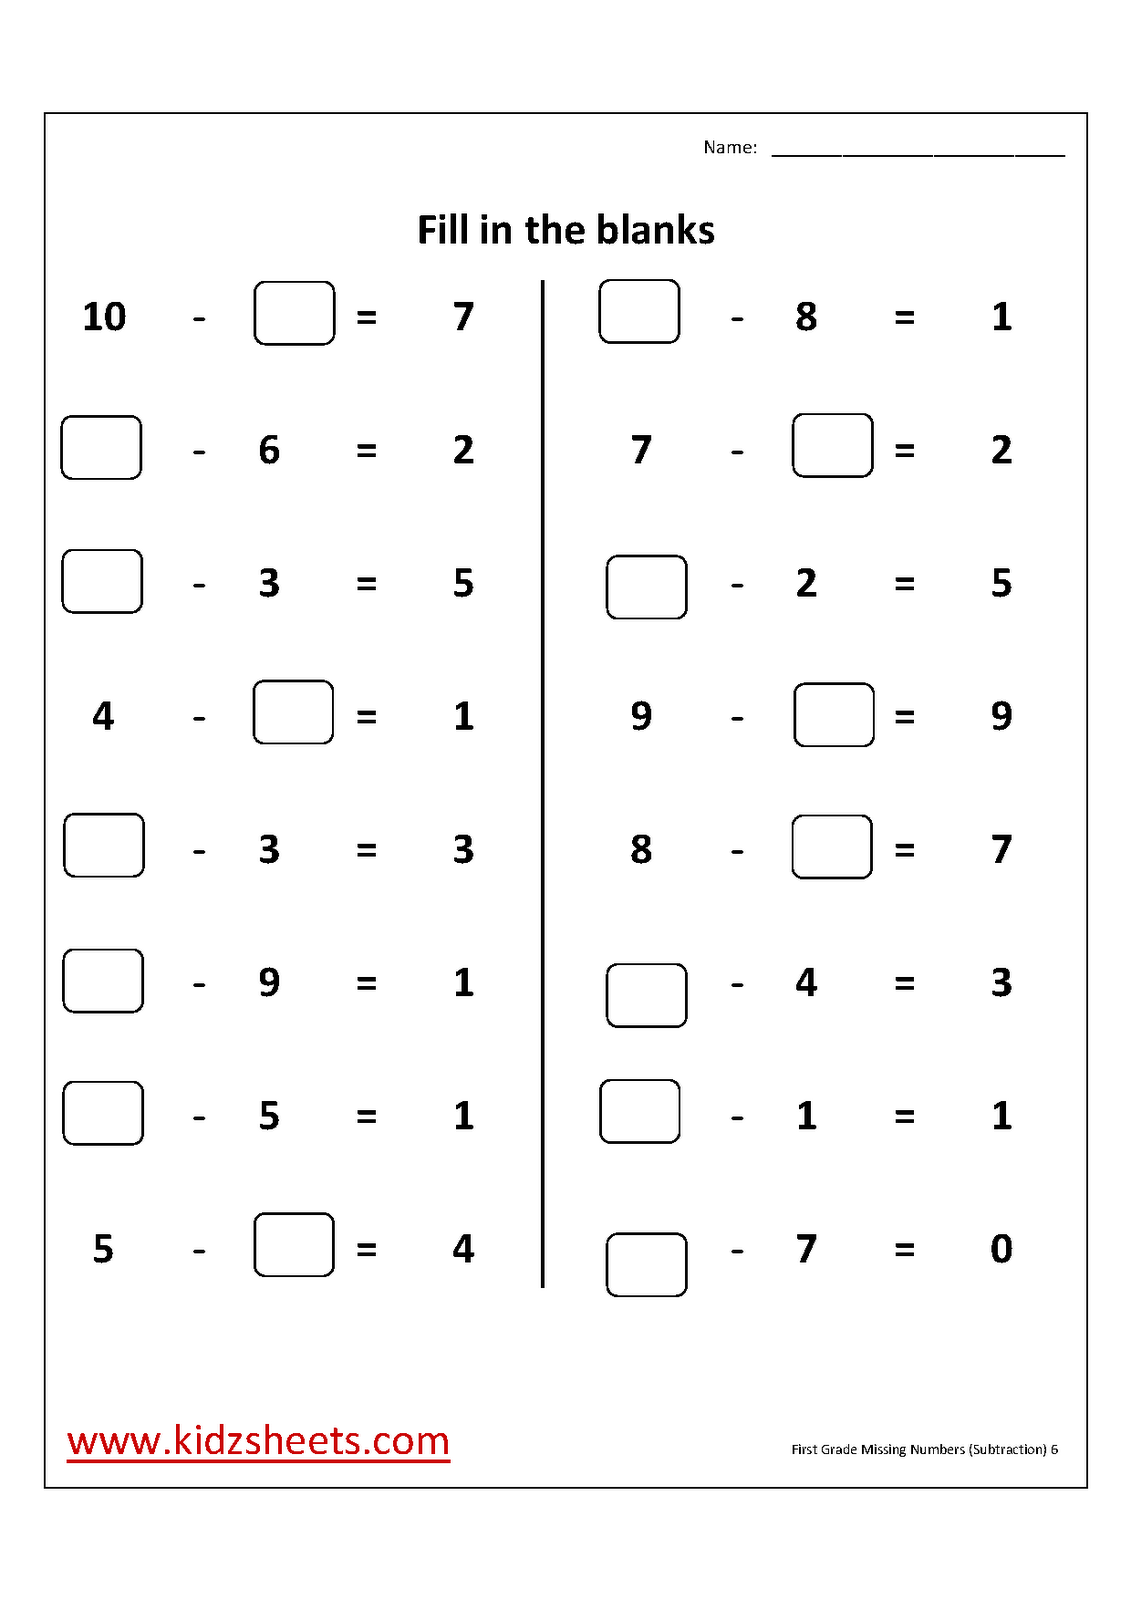 missing-numbers-in-addition-and-subtraction-worksheets-algebra-worksheet-missing-numbers-in